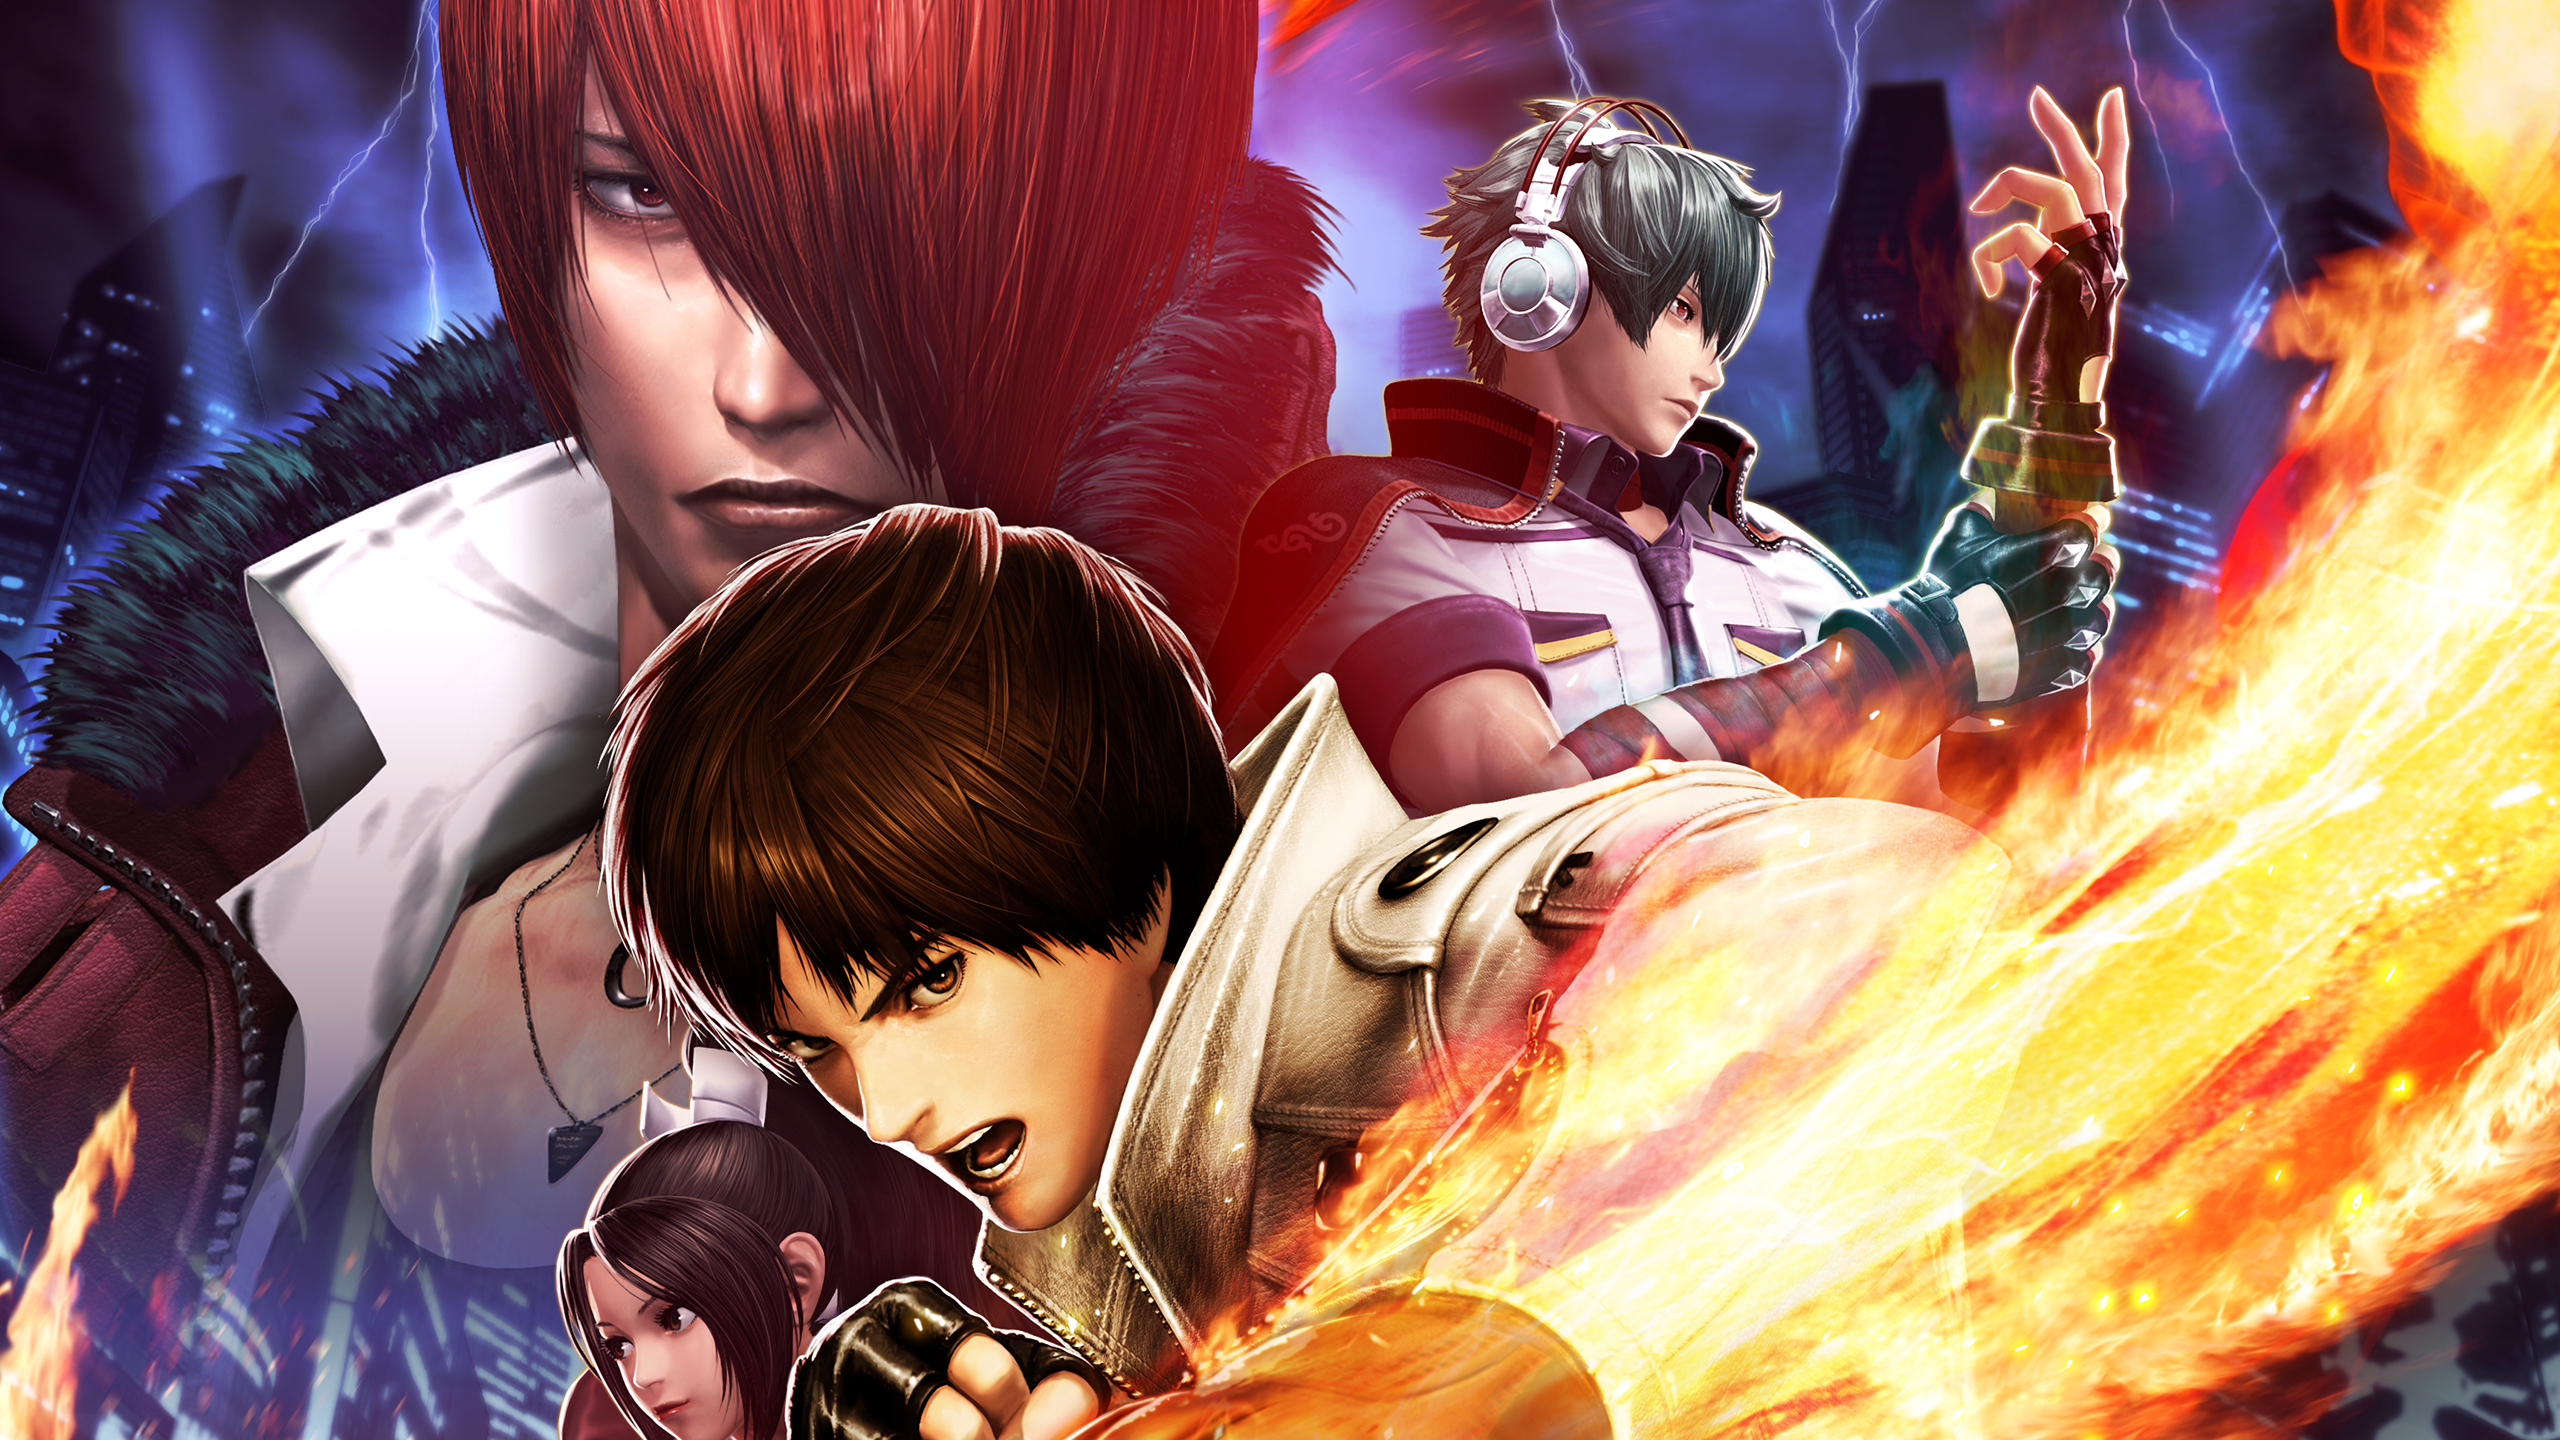 King Of Fighters Iori Yagami Video Game Warriors Video Game Art Video Games 2560x1440